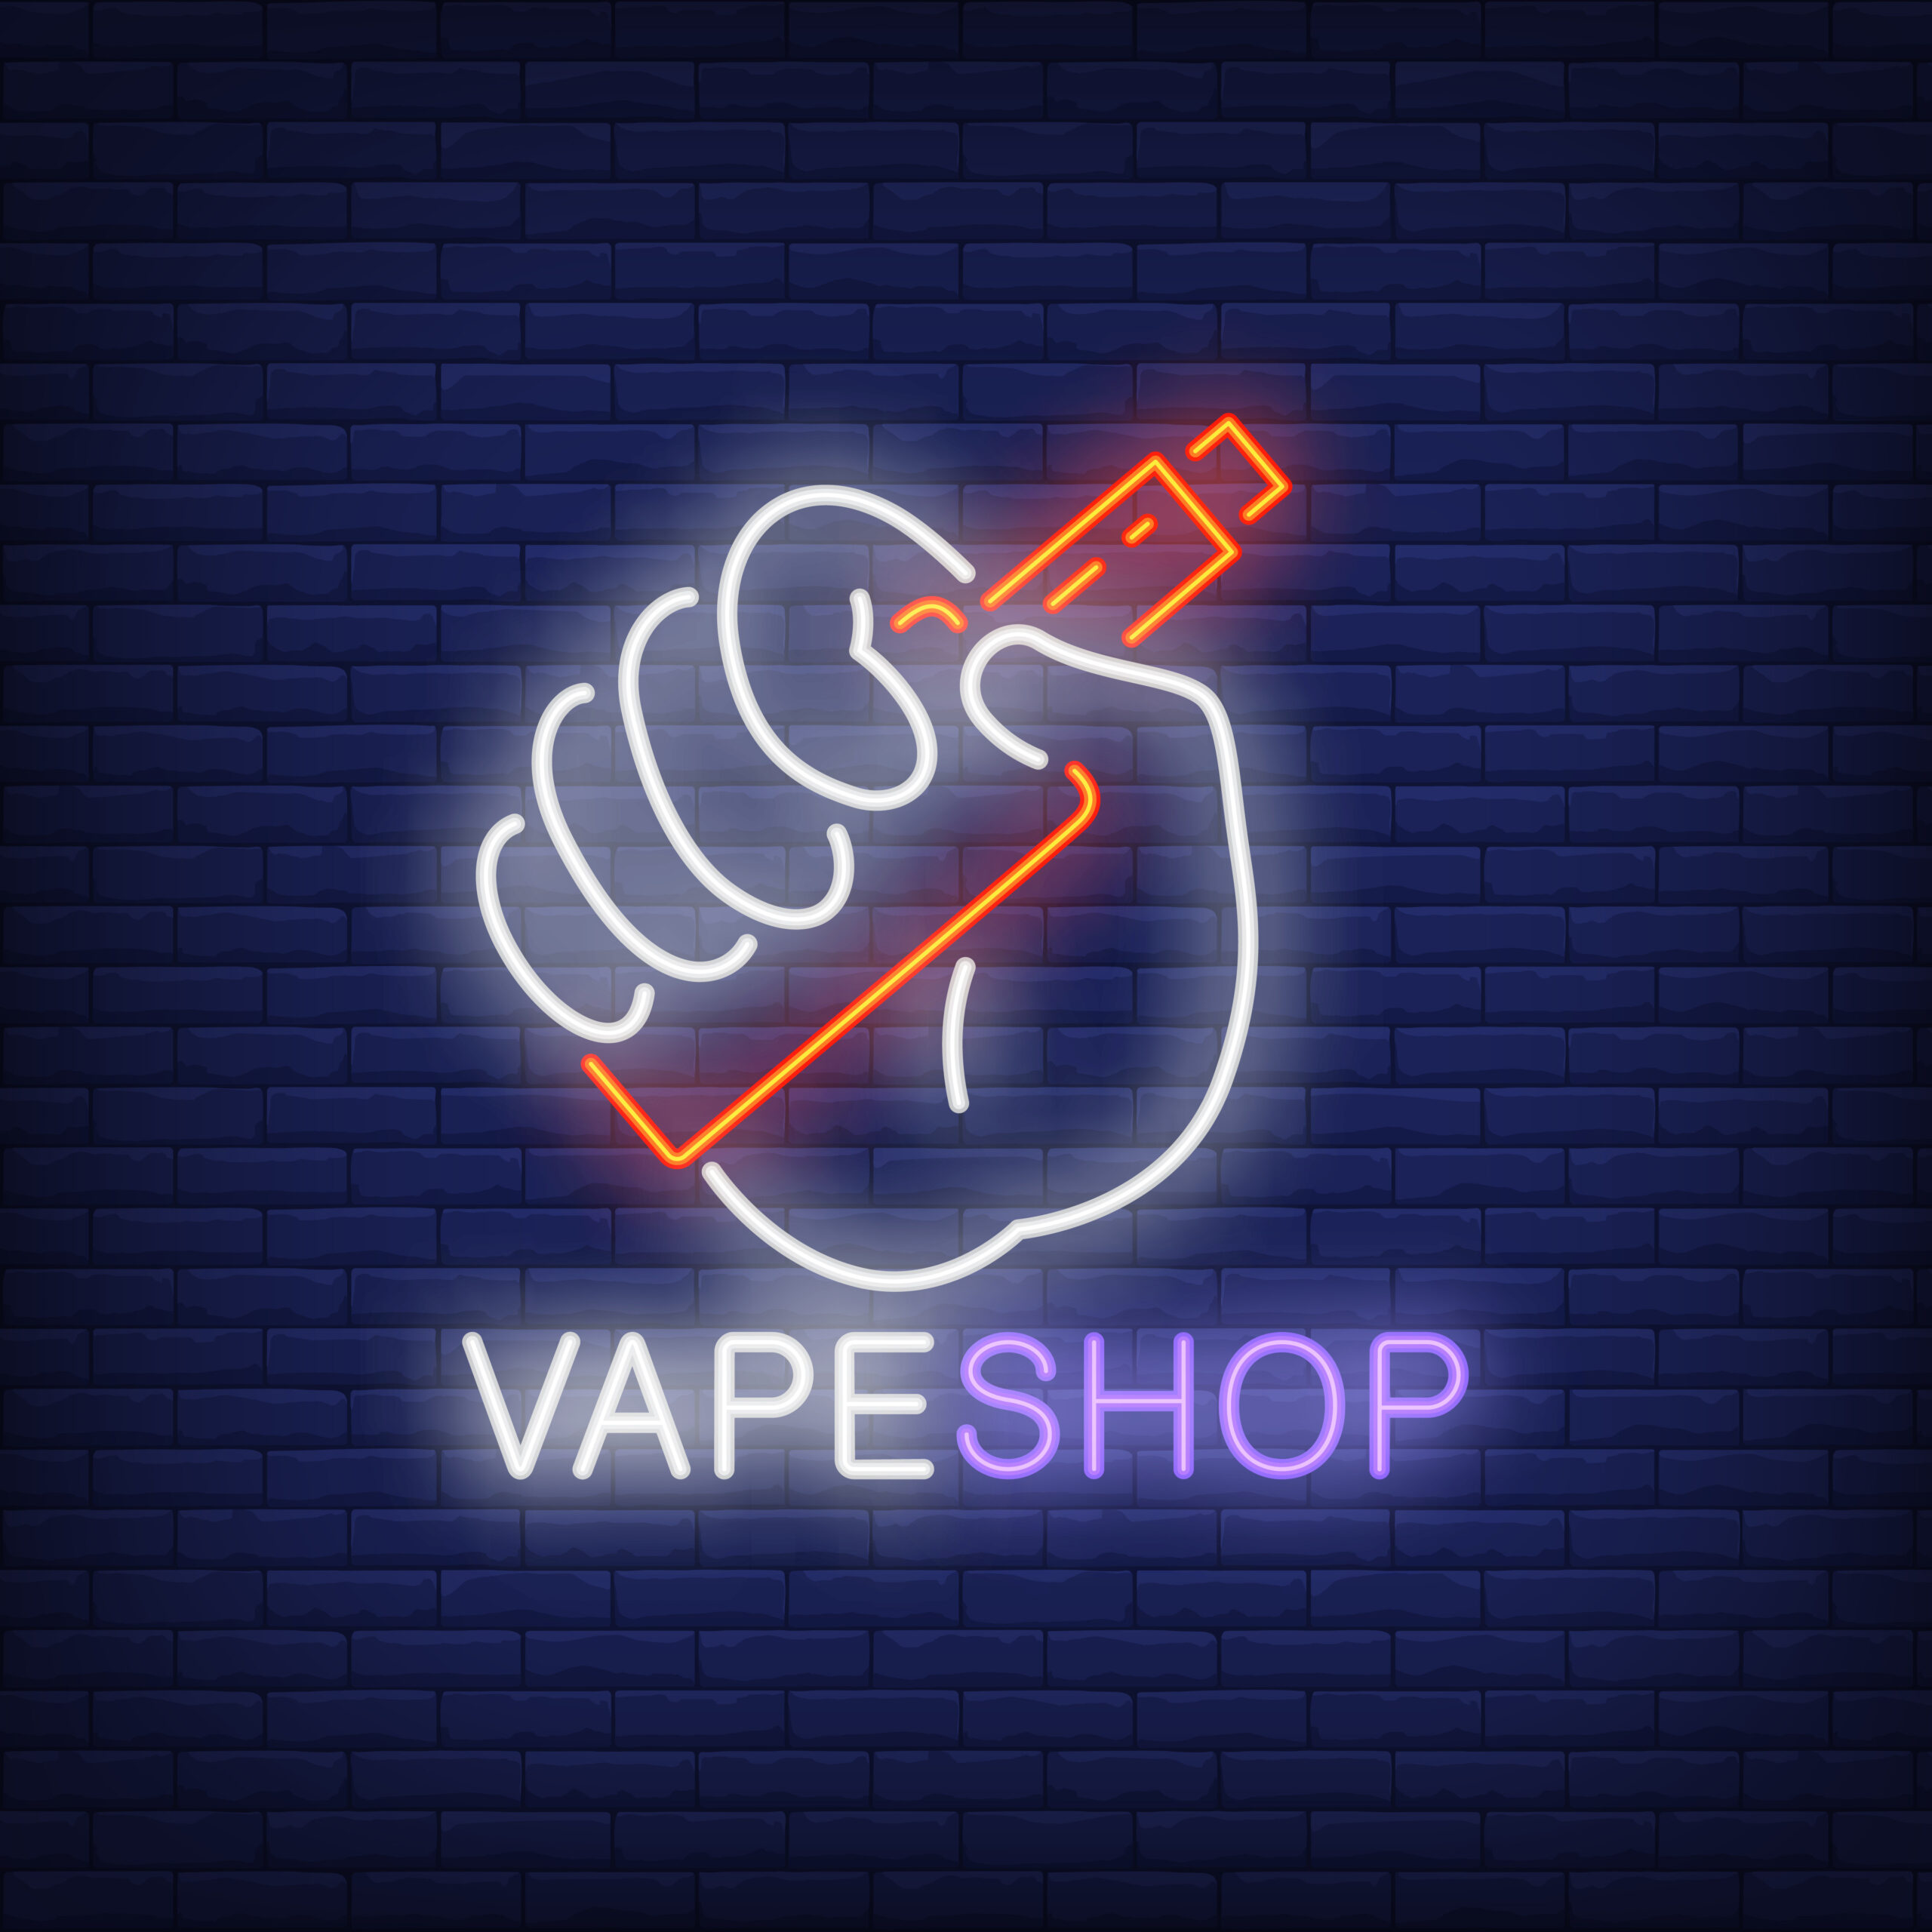 Different Types of Vapes
“ Start with disposable vape bars, which come in a variety of hues and tastes ”.